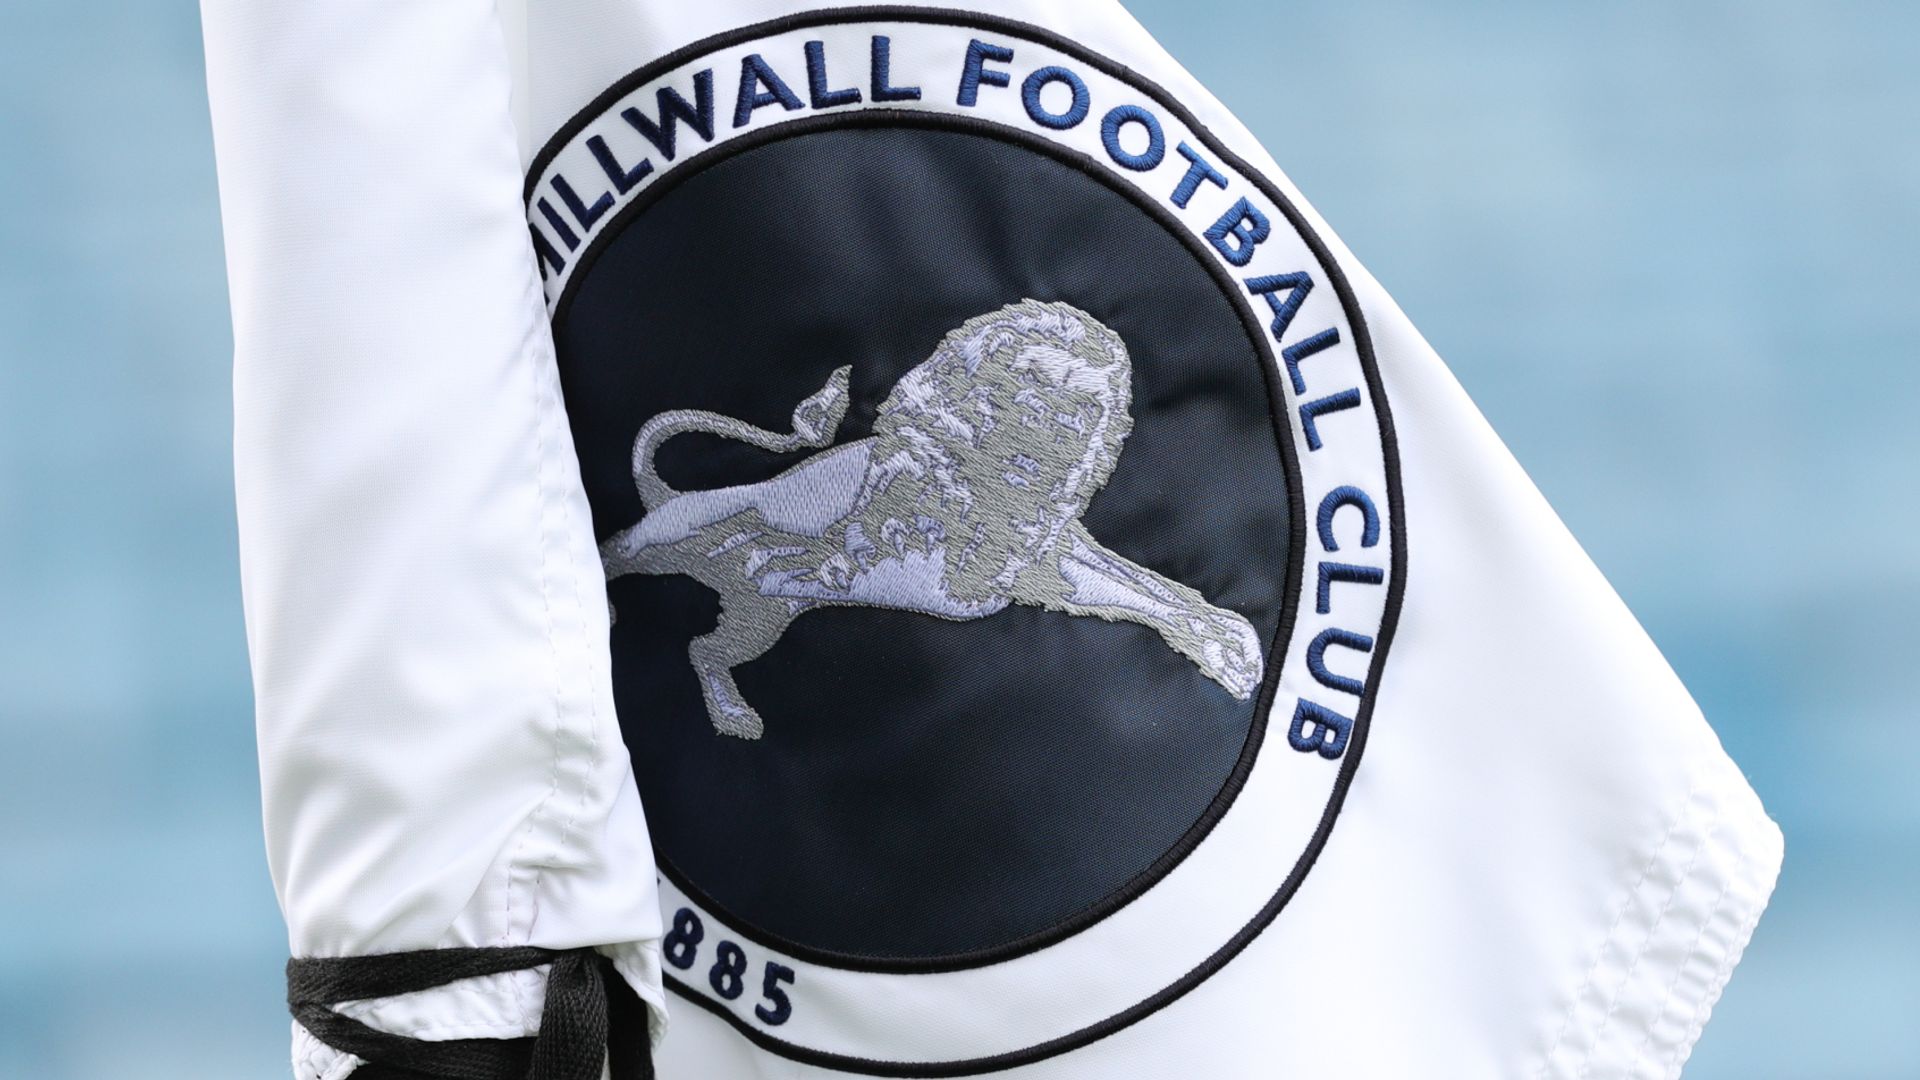 Millwall welcome Singh Johal to Lions' Den